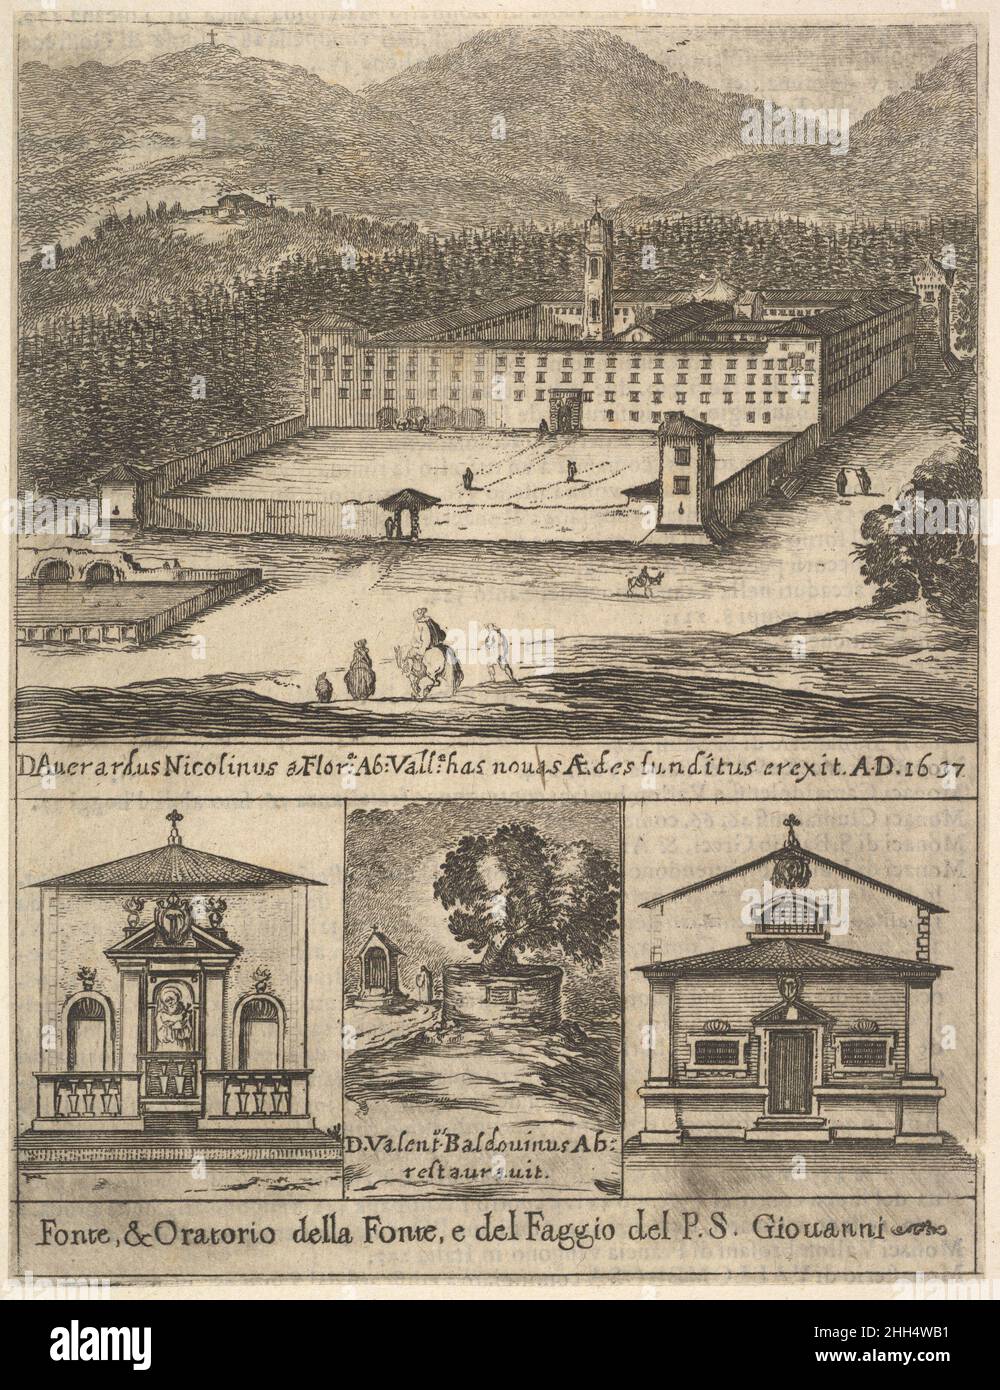 Four views: at top, a view of the new monastery of Vallombrosa, at bottom left and right, a view of a chapel, at bottom center, the tree of St. John Gualbert, from 'Frontispiece and four scenes from the life of Saint John Gualbert' (Frontispice et quatre vignettes pour une vie de Saint Jean Gualbert) 1640 Stefano della Bella Italian. Four views: at top, a view of the new monastery of Vallombrosa, at bottom left and right, a view of a chapel, at bottom center, the tree of St. John Gualbert, from 'Frontispiece and four scenes from the life of Saint John Gualbert' (Frontispice et quatre vignettes Stock Photo